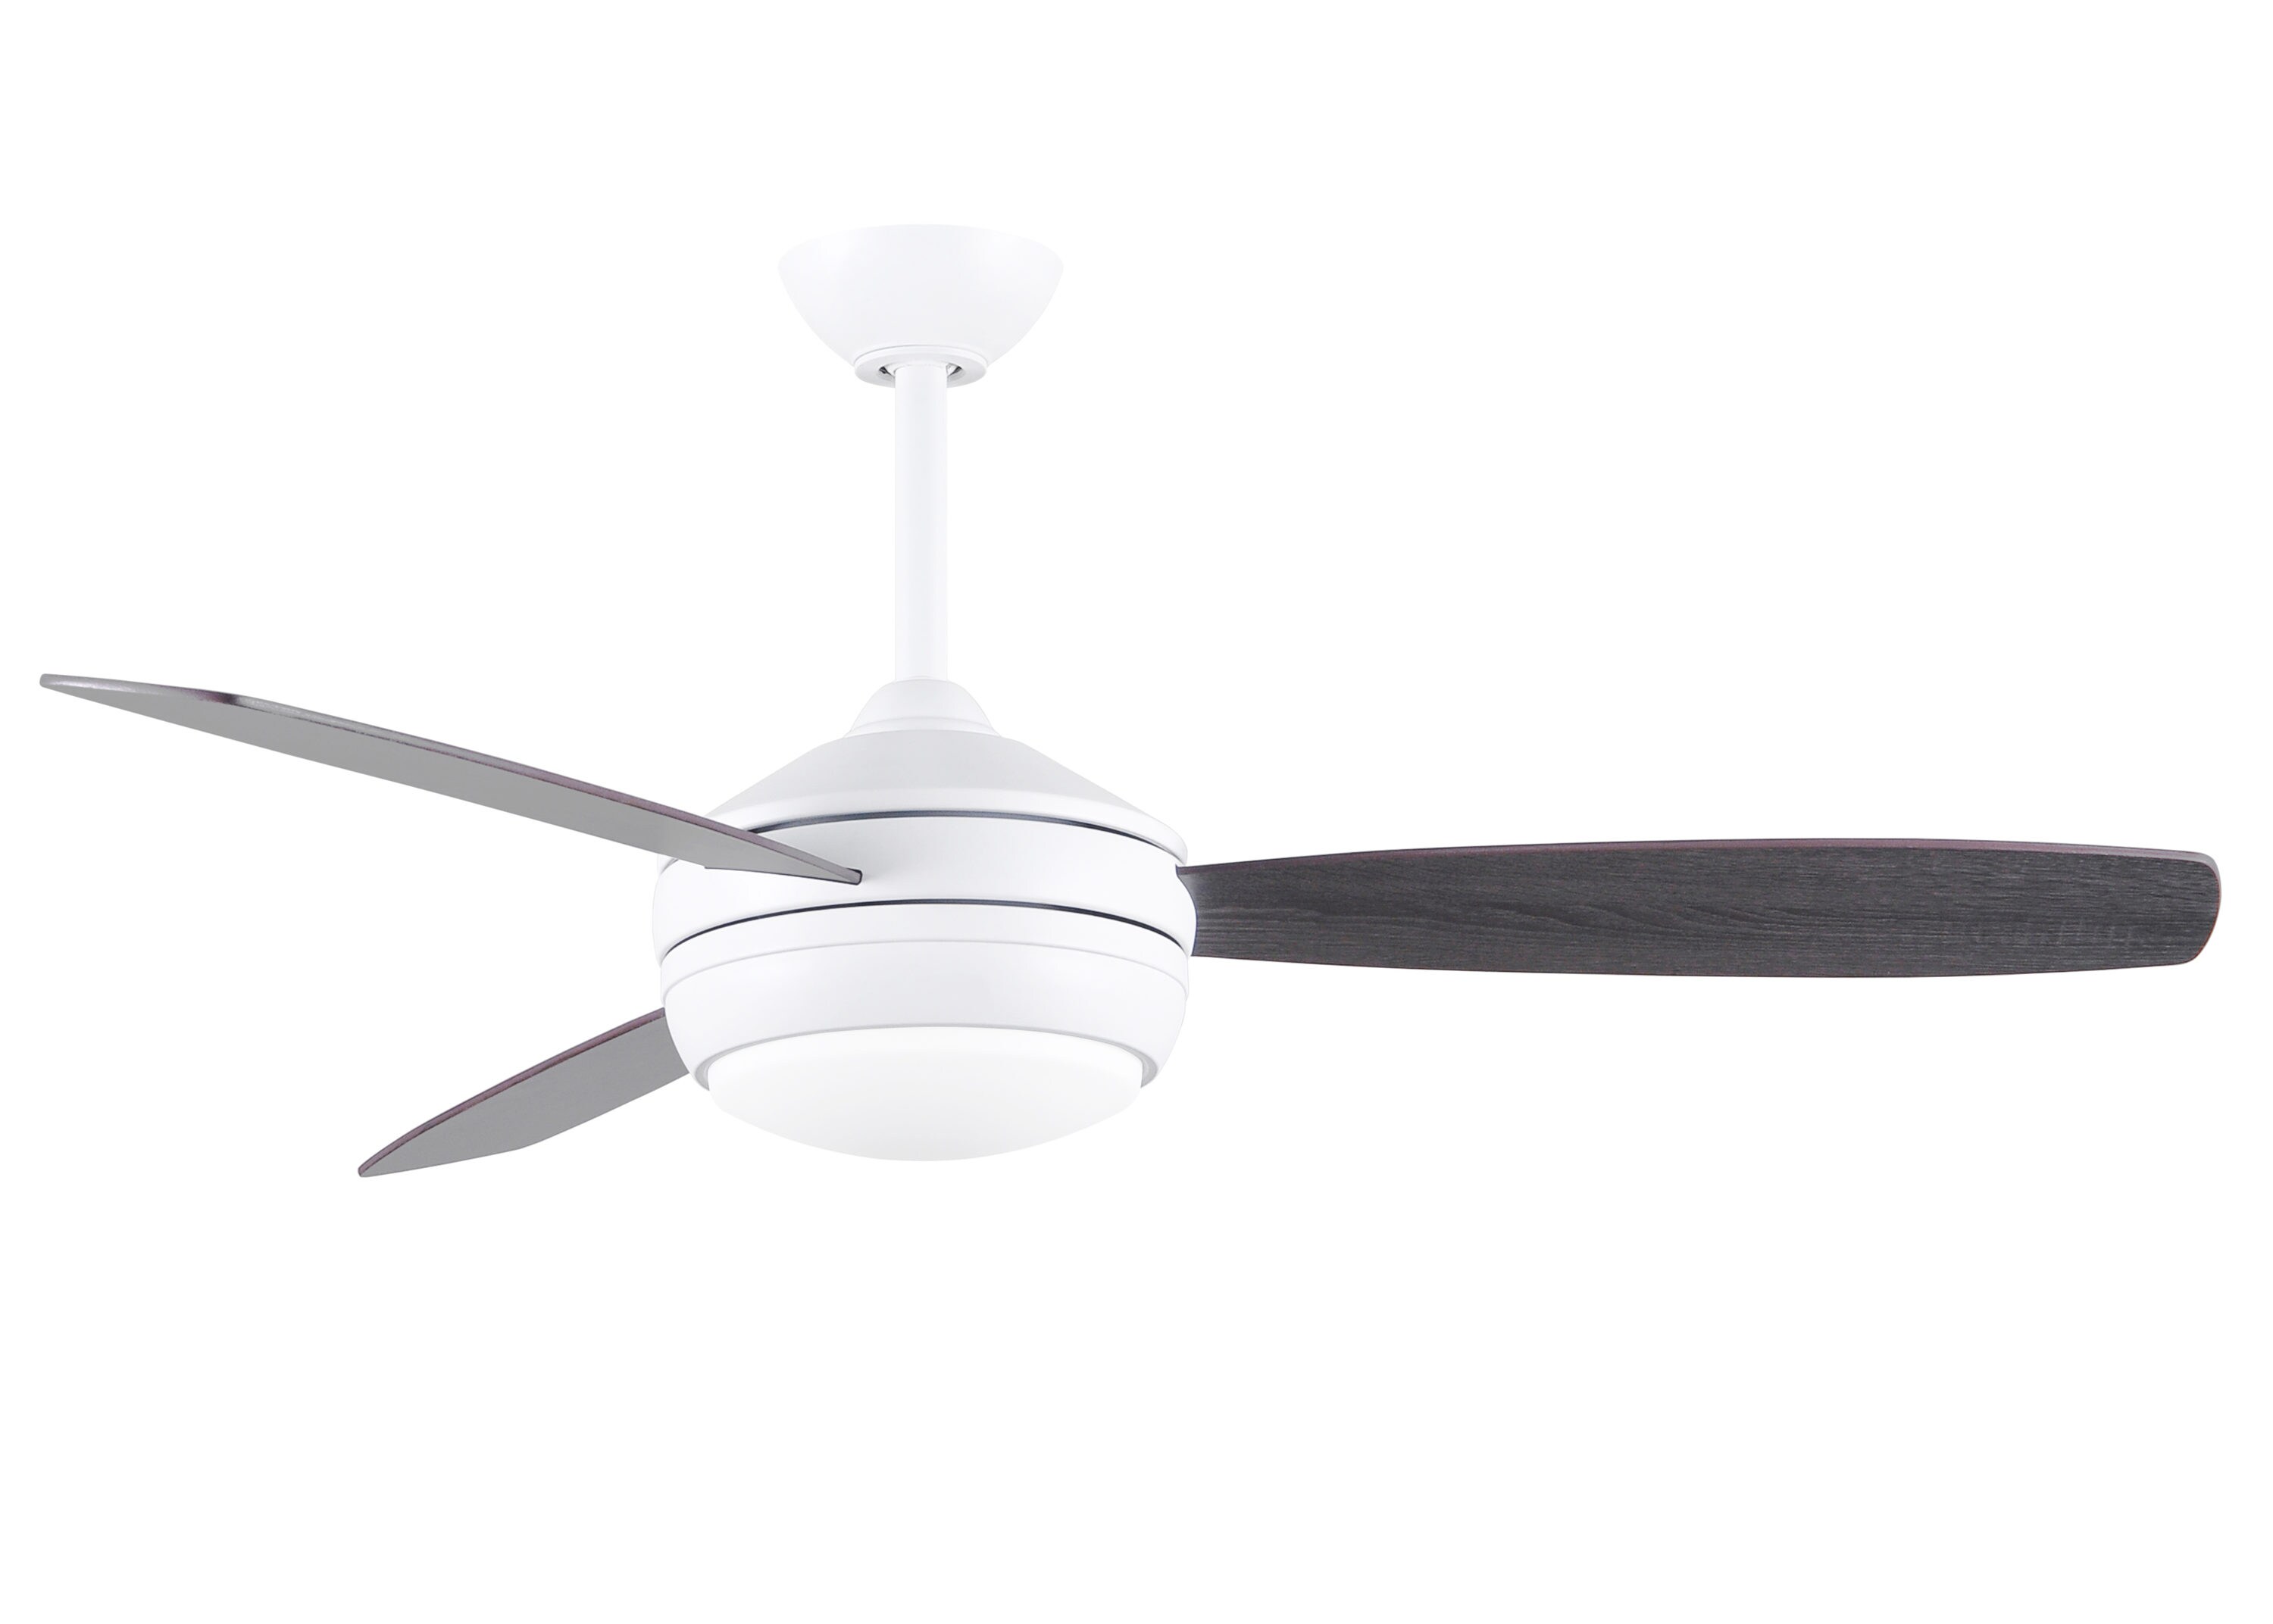 NEW WHITE VENTAIR UNIVERSAL INDOOR WALL/CEILING EXHAUST FAN 